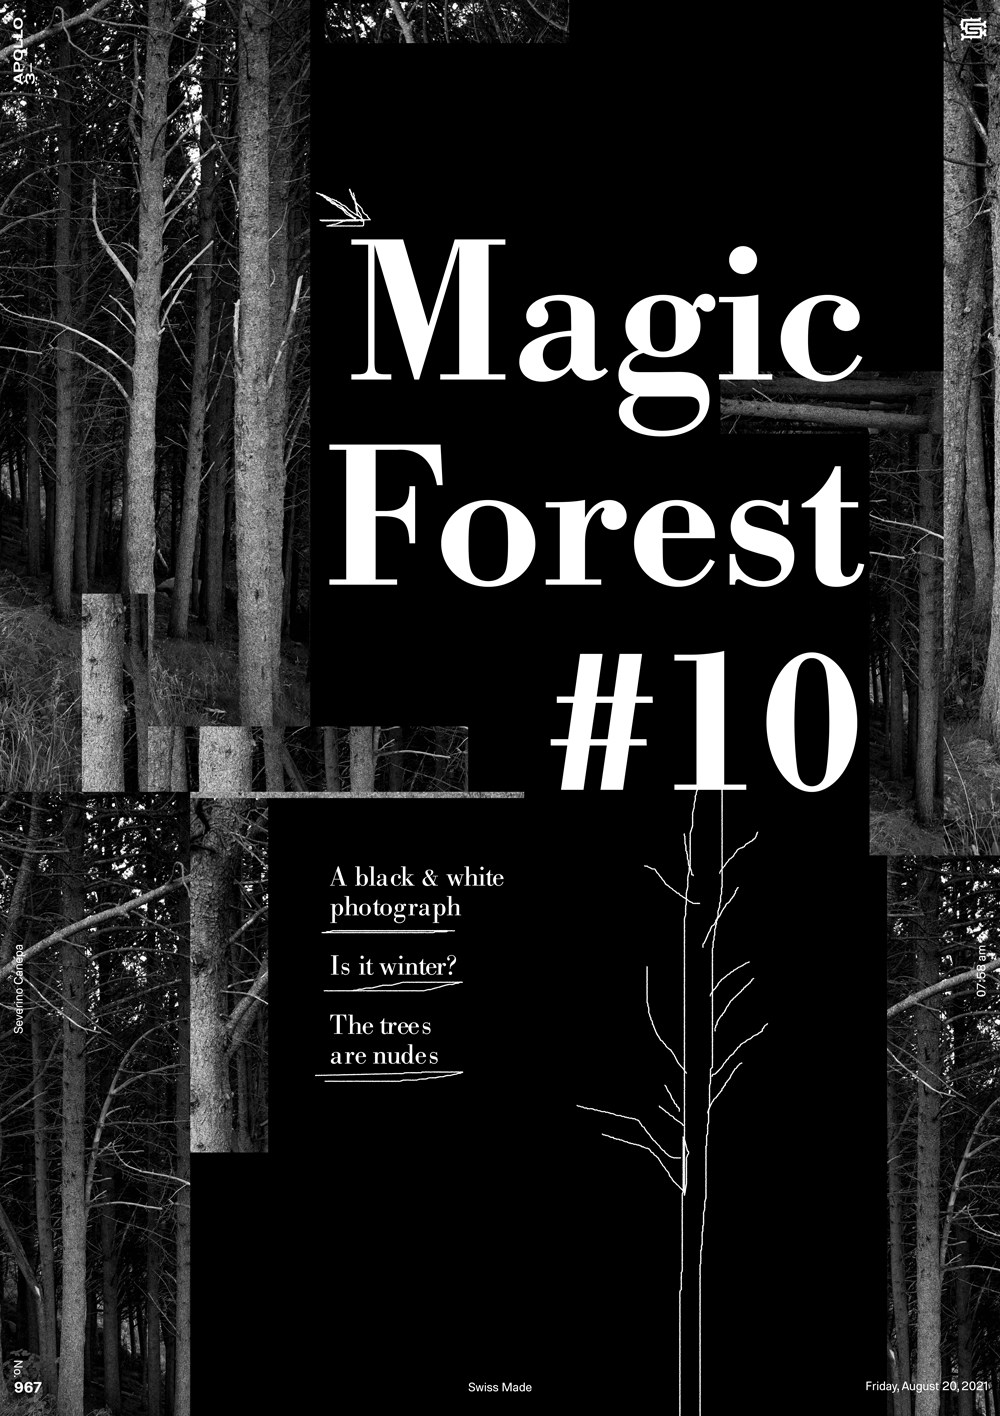 Visual creation made with a large typography and the photograph of a forest